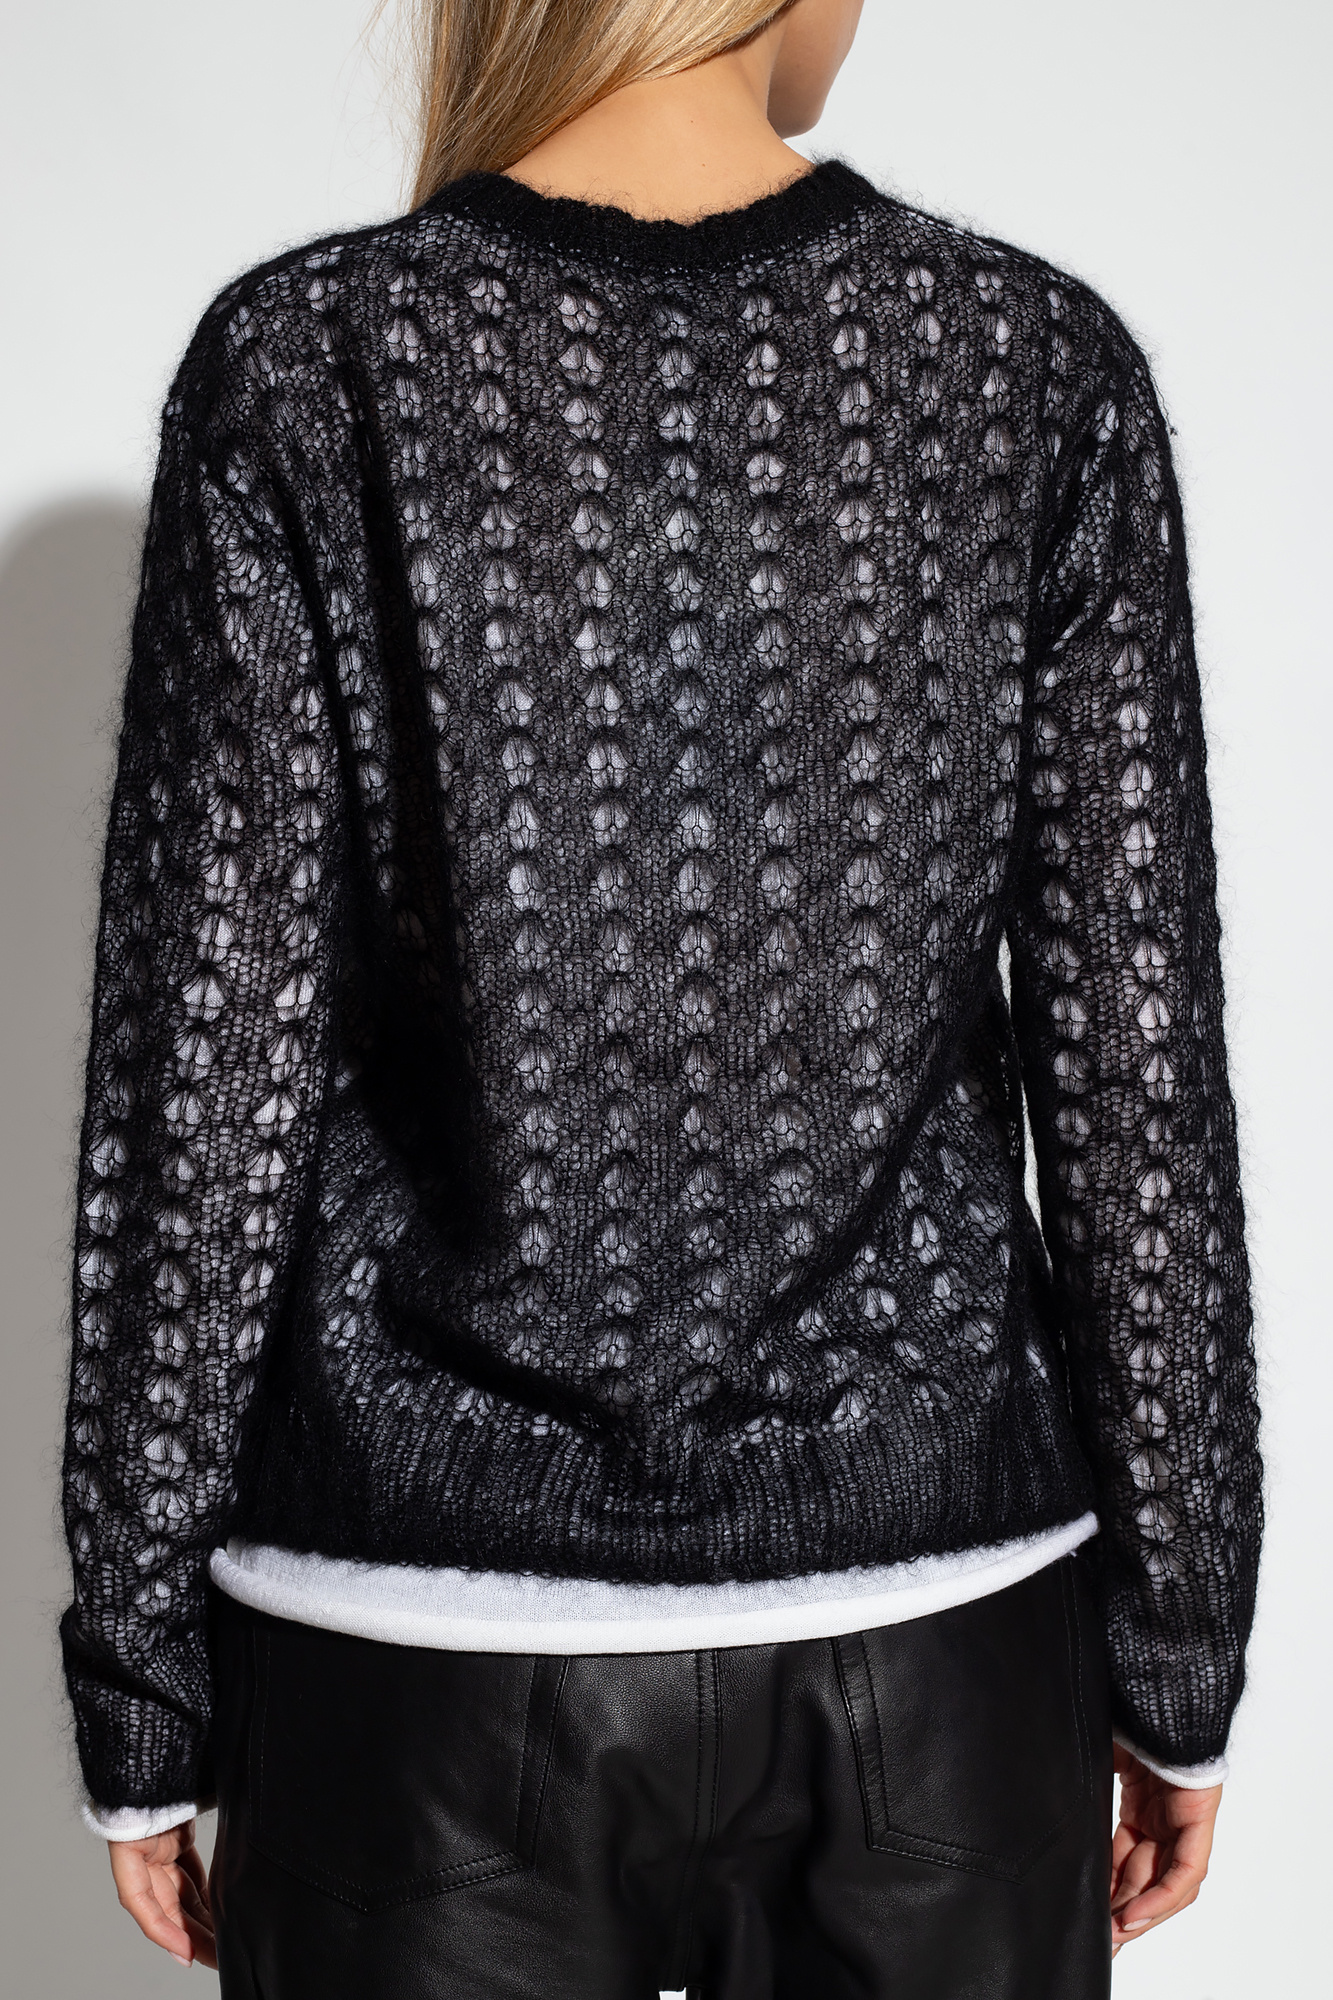 TOTEME sweater biker with stitching details